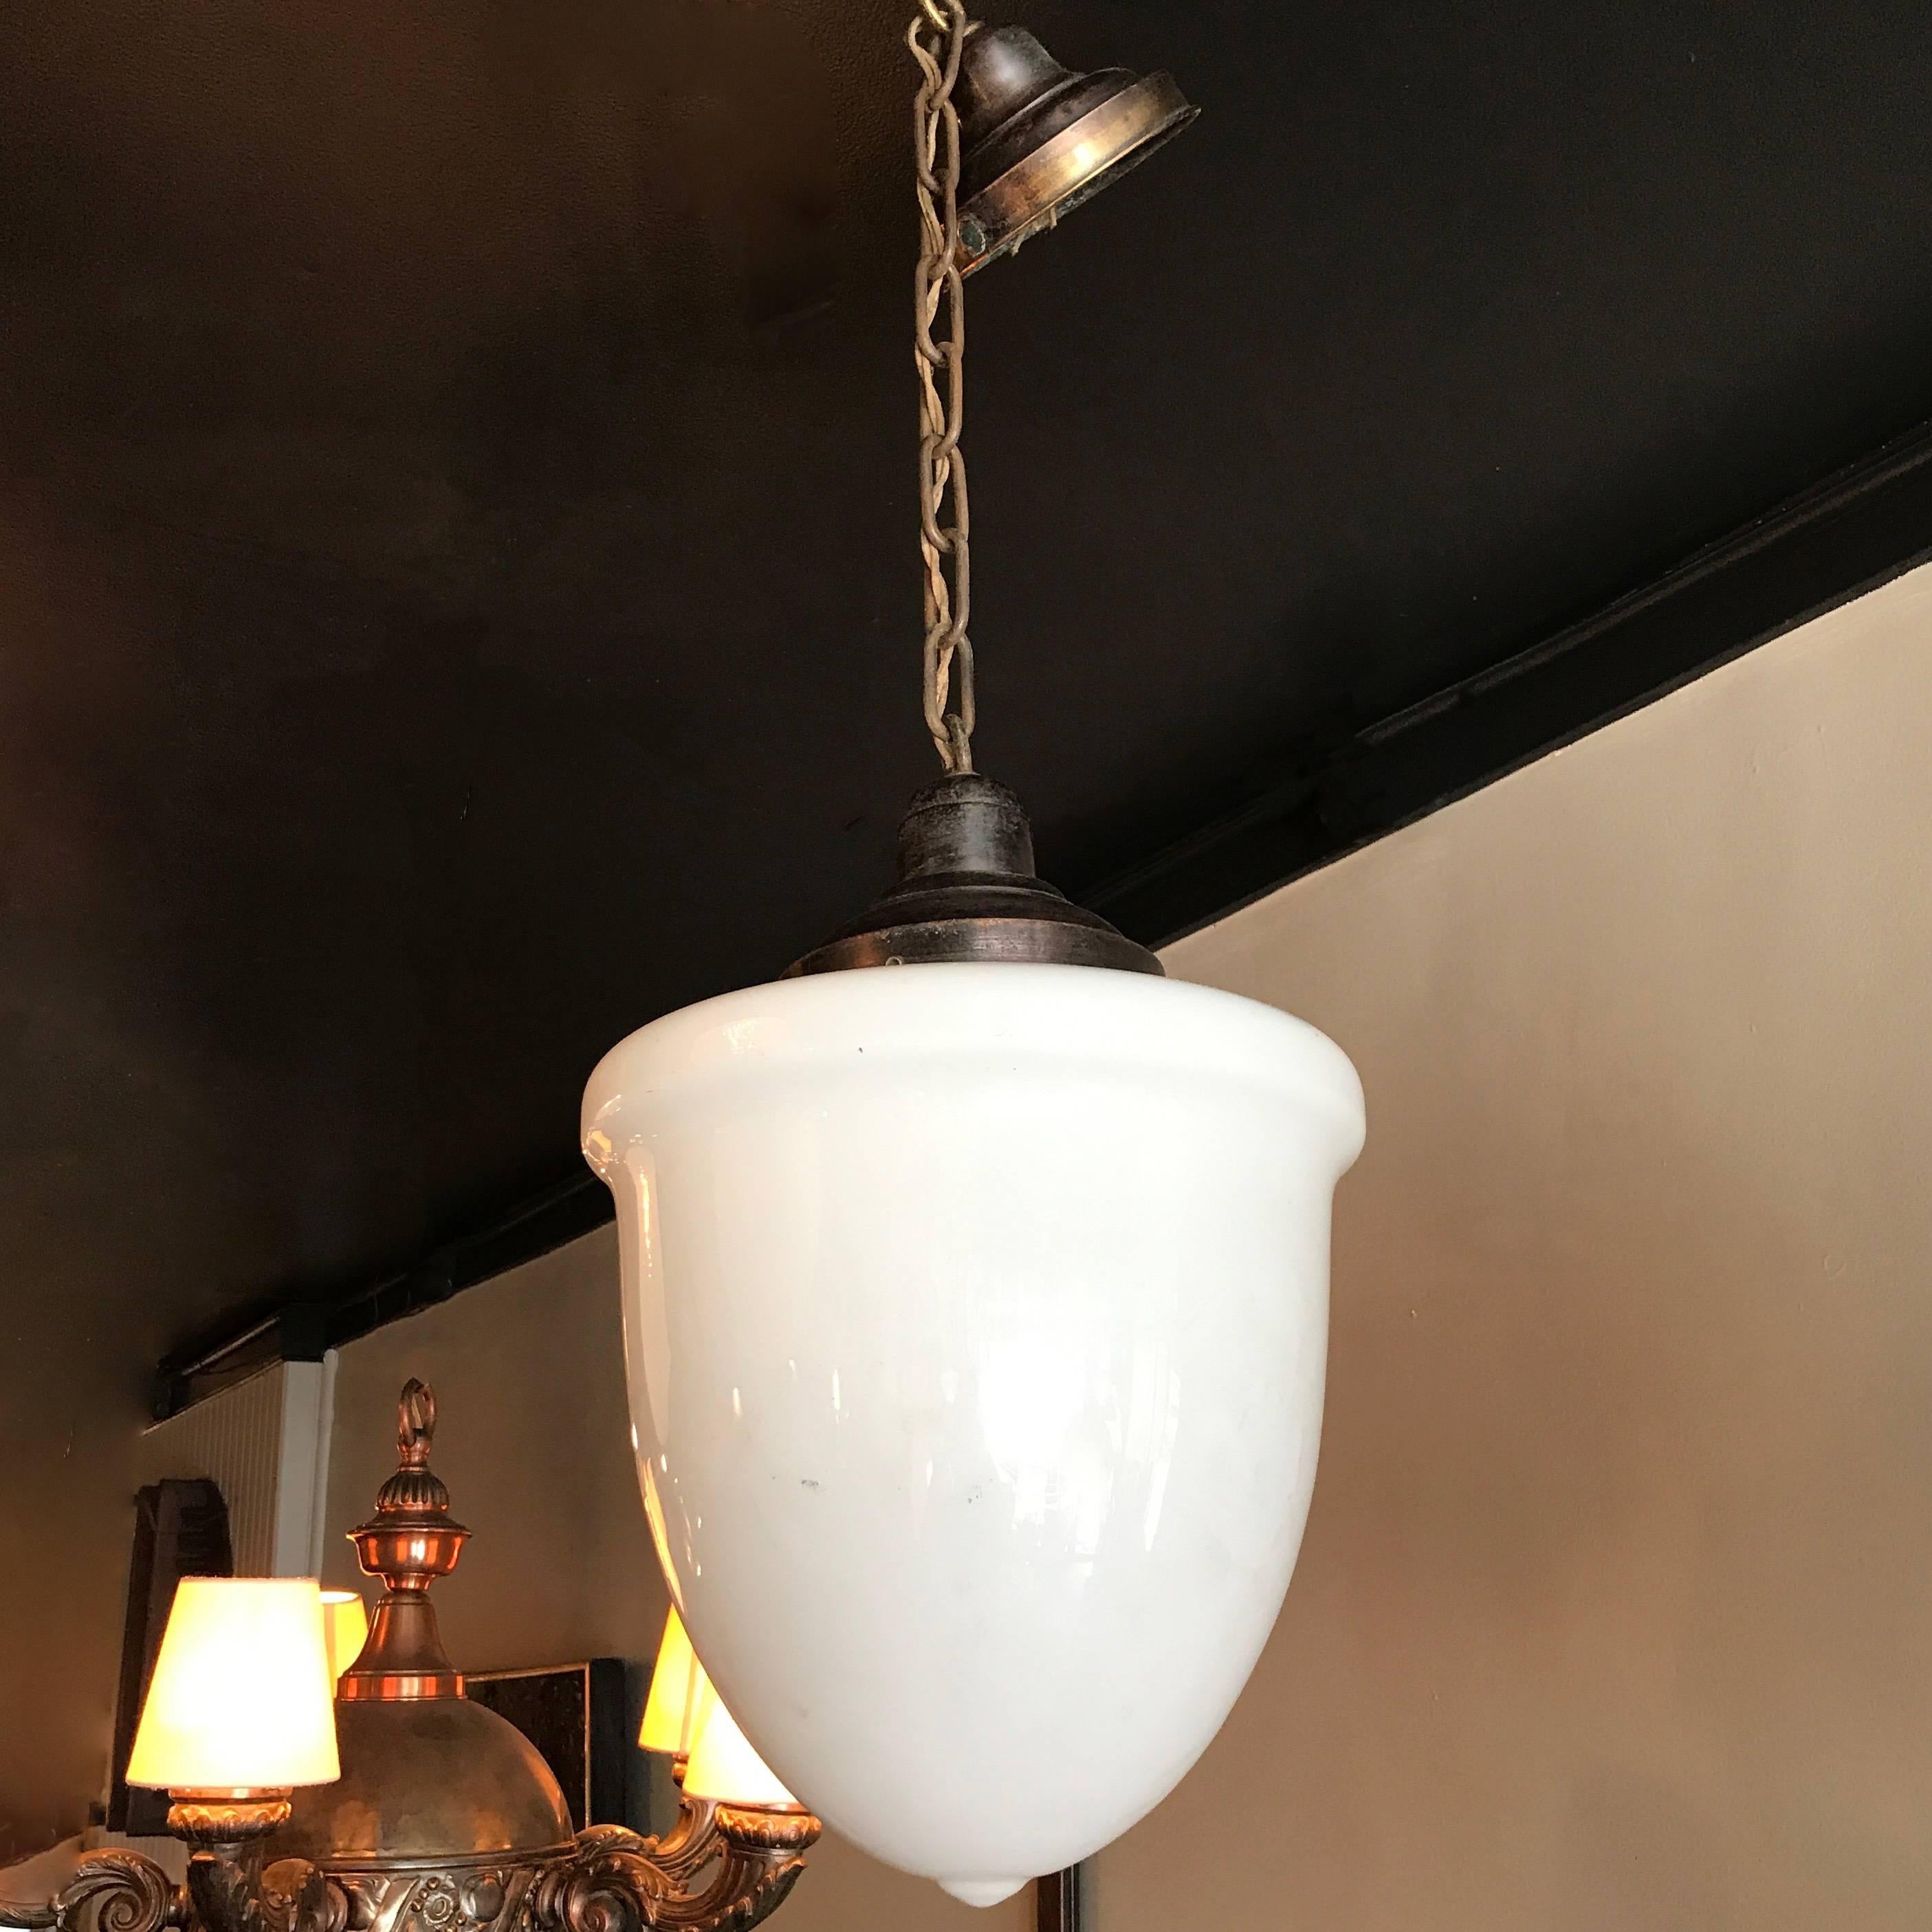 Art Deco, pharmacy pendant light features an elongated milk glass shade with brass fitter, 24 inches of chain and canopy is newly wired and can accept up to a 200 watt bulb.